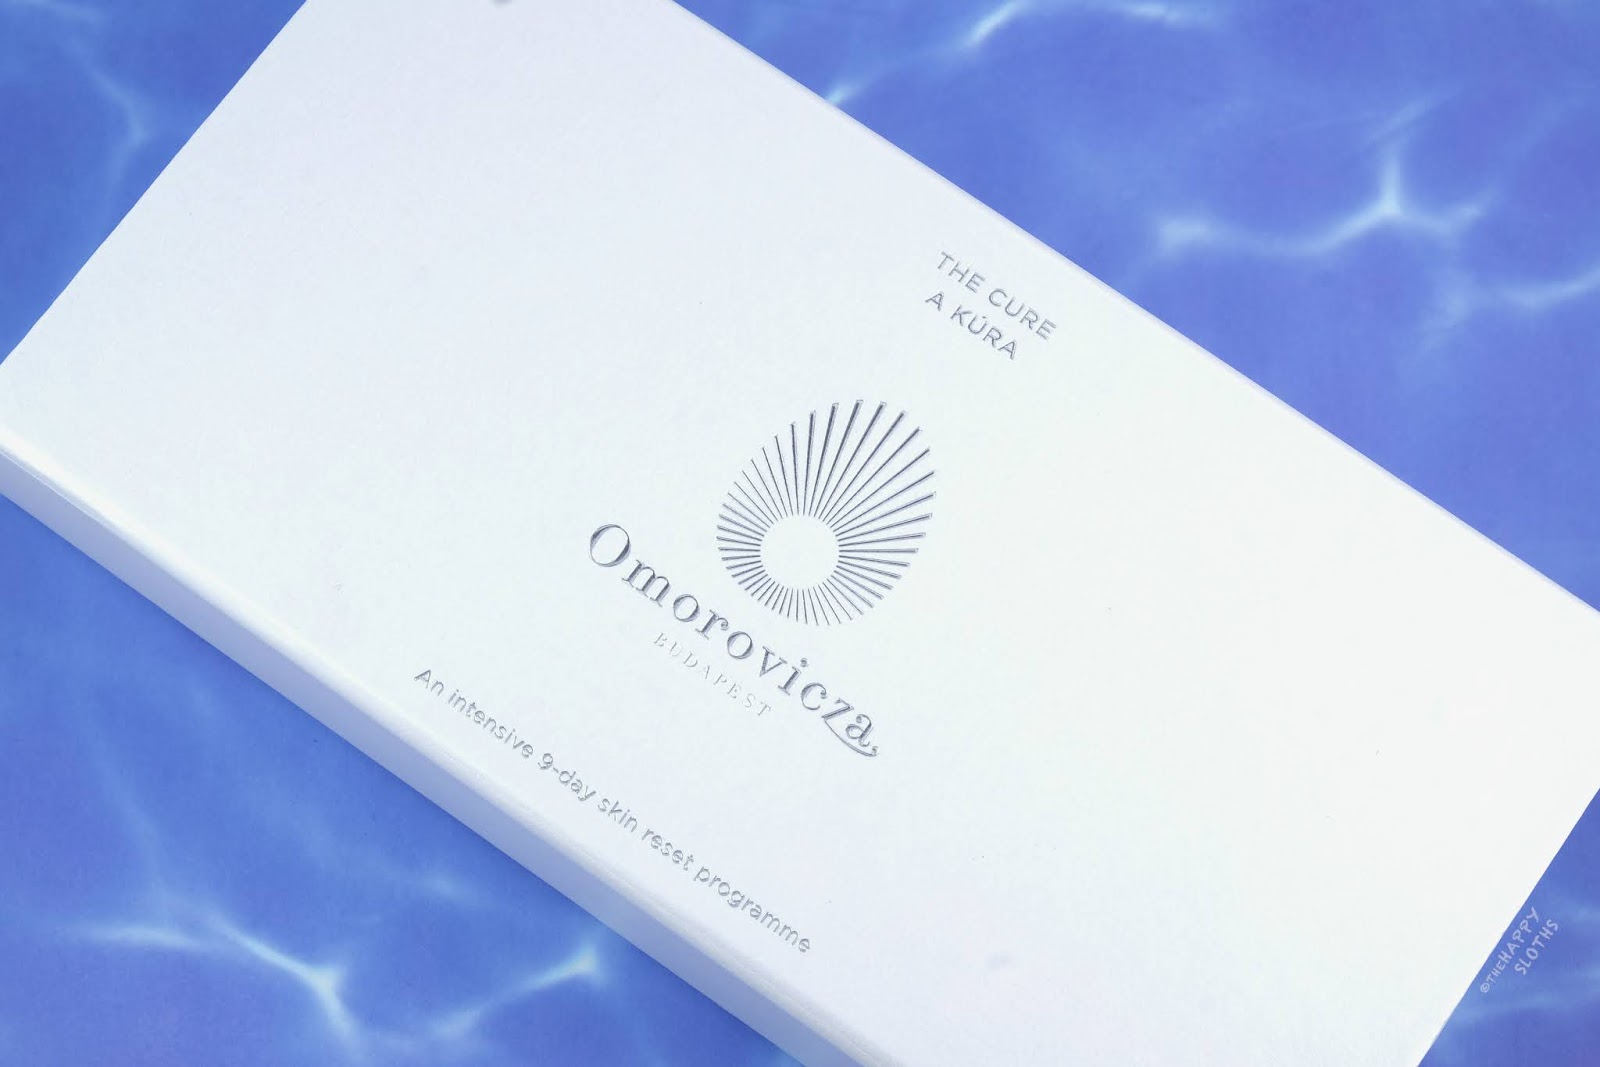 Omorovicza | The Cure 9-Day Skin Rest Program: Review